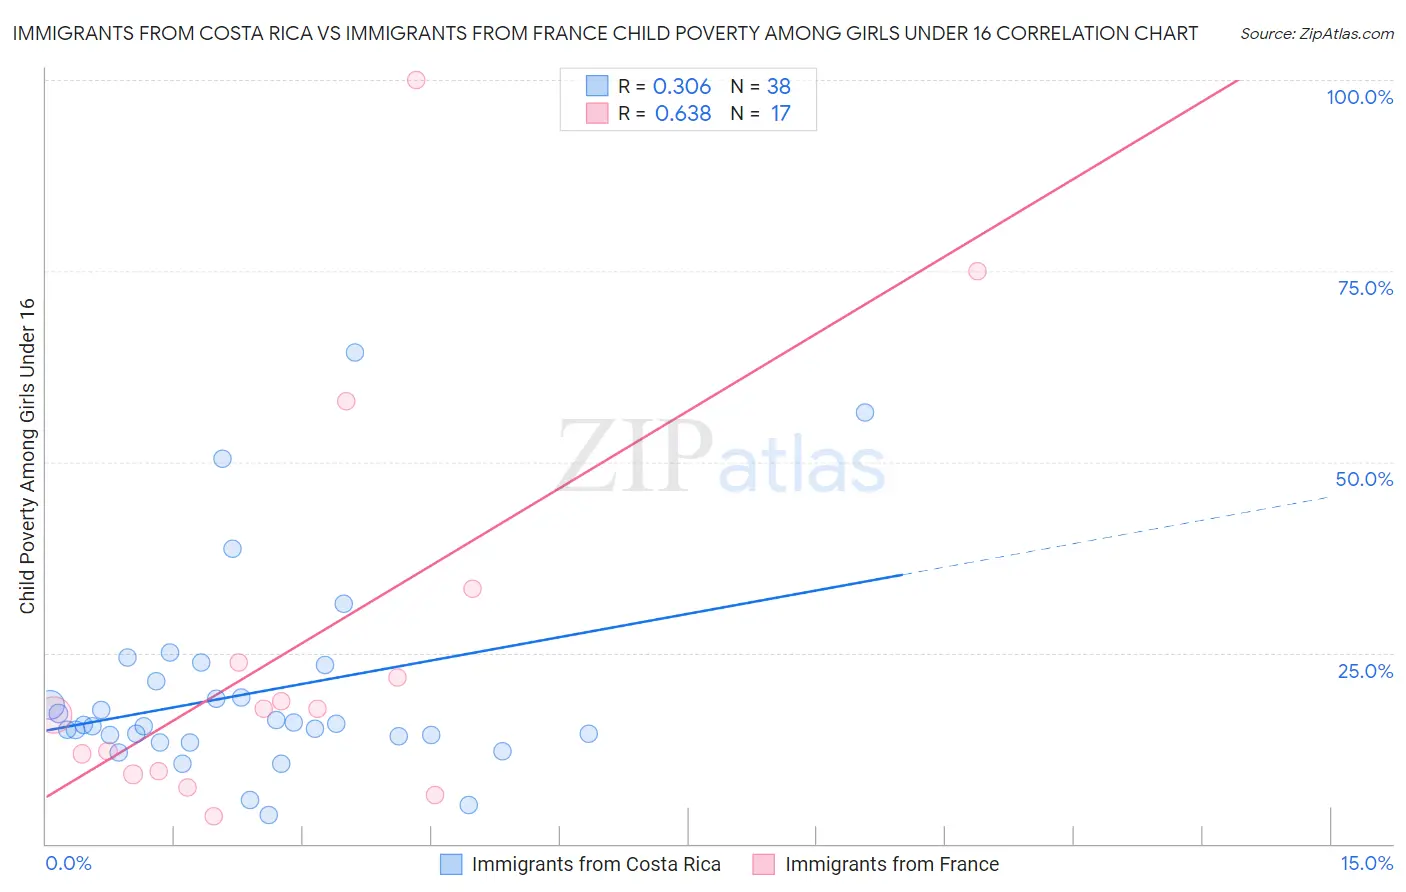 Immigrants from Costa Rica vs Immigrants from France Child Poverty Among Girls Under 16